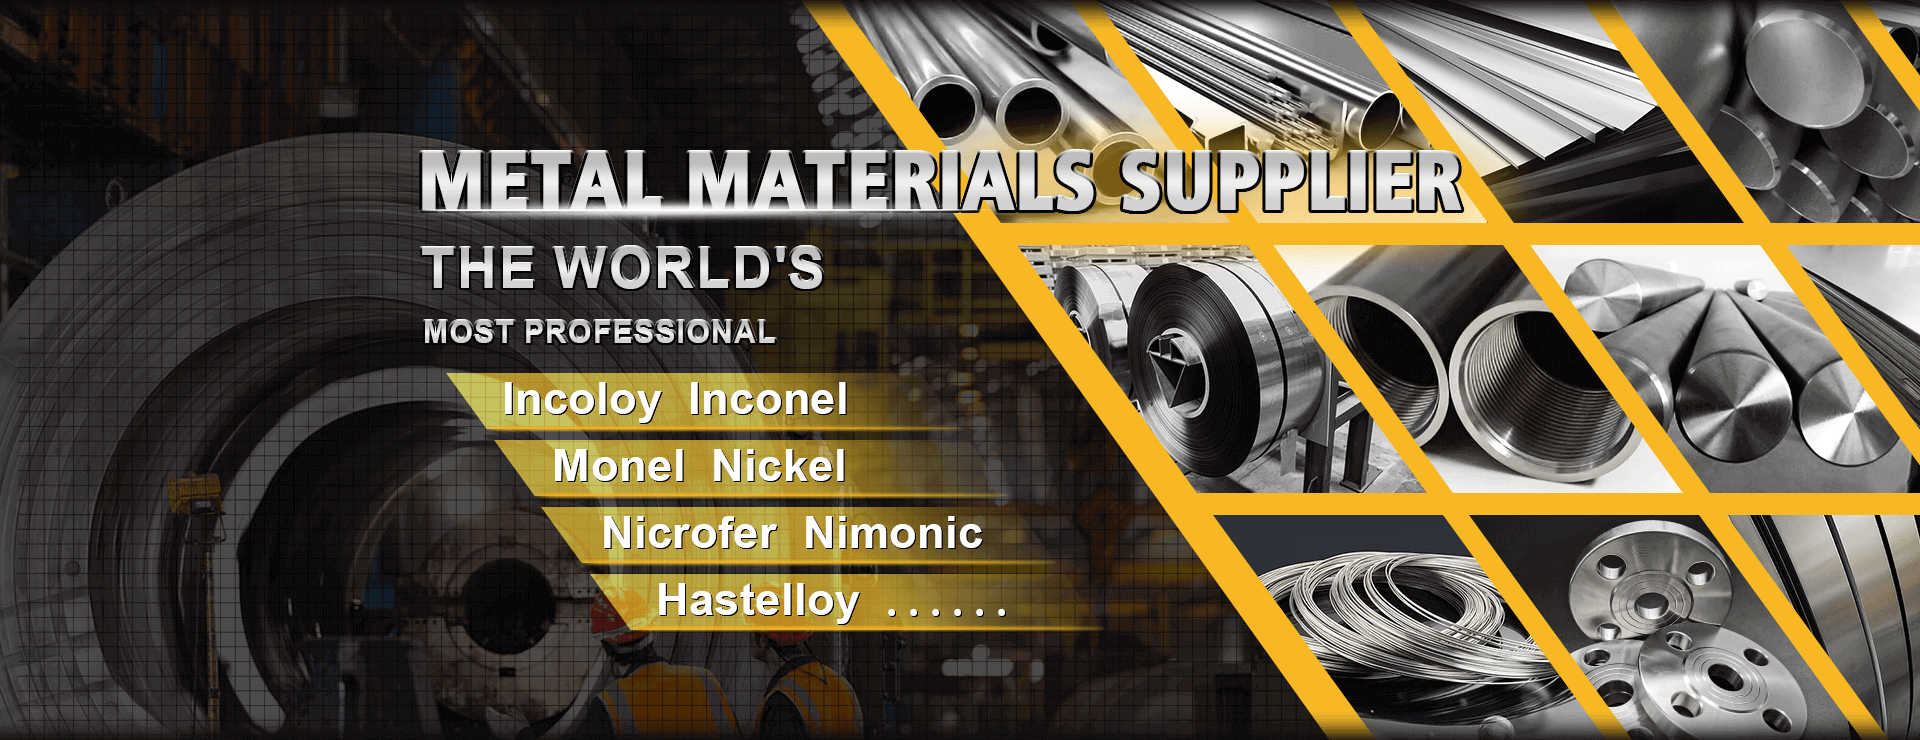 The_world_s_most_professional_metal_materials_supplier_Stainless_steel_and_nickel_alloy-2